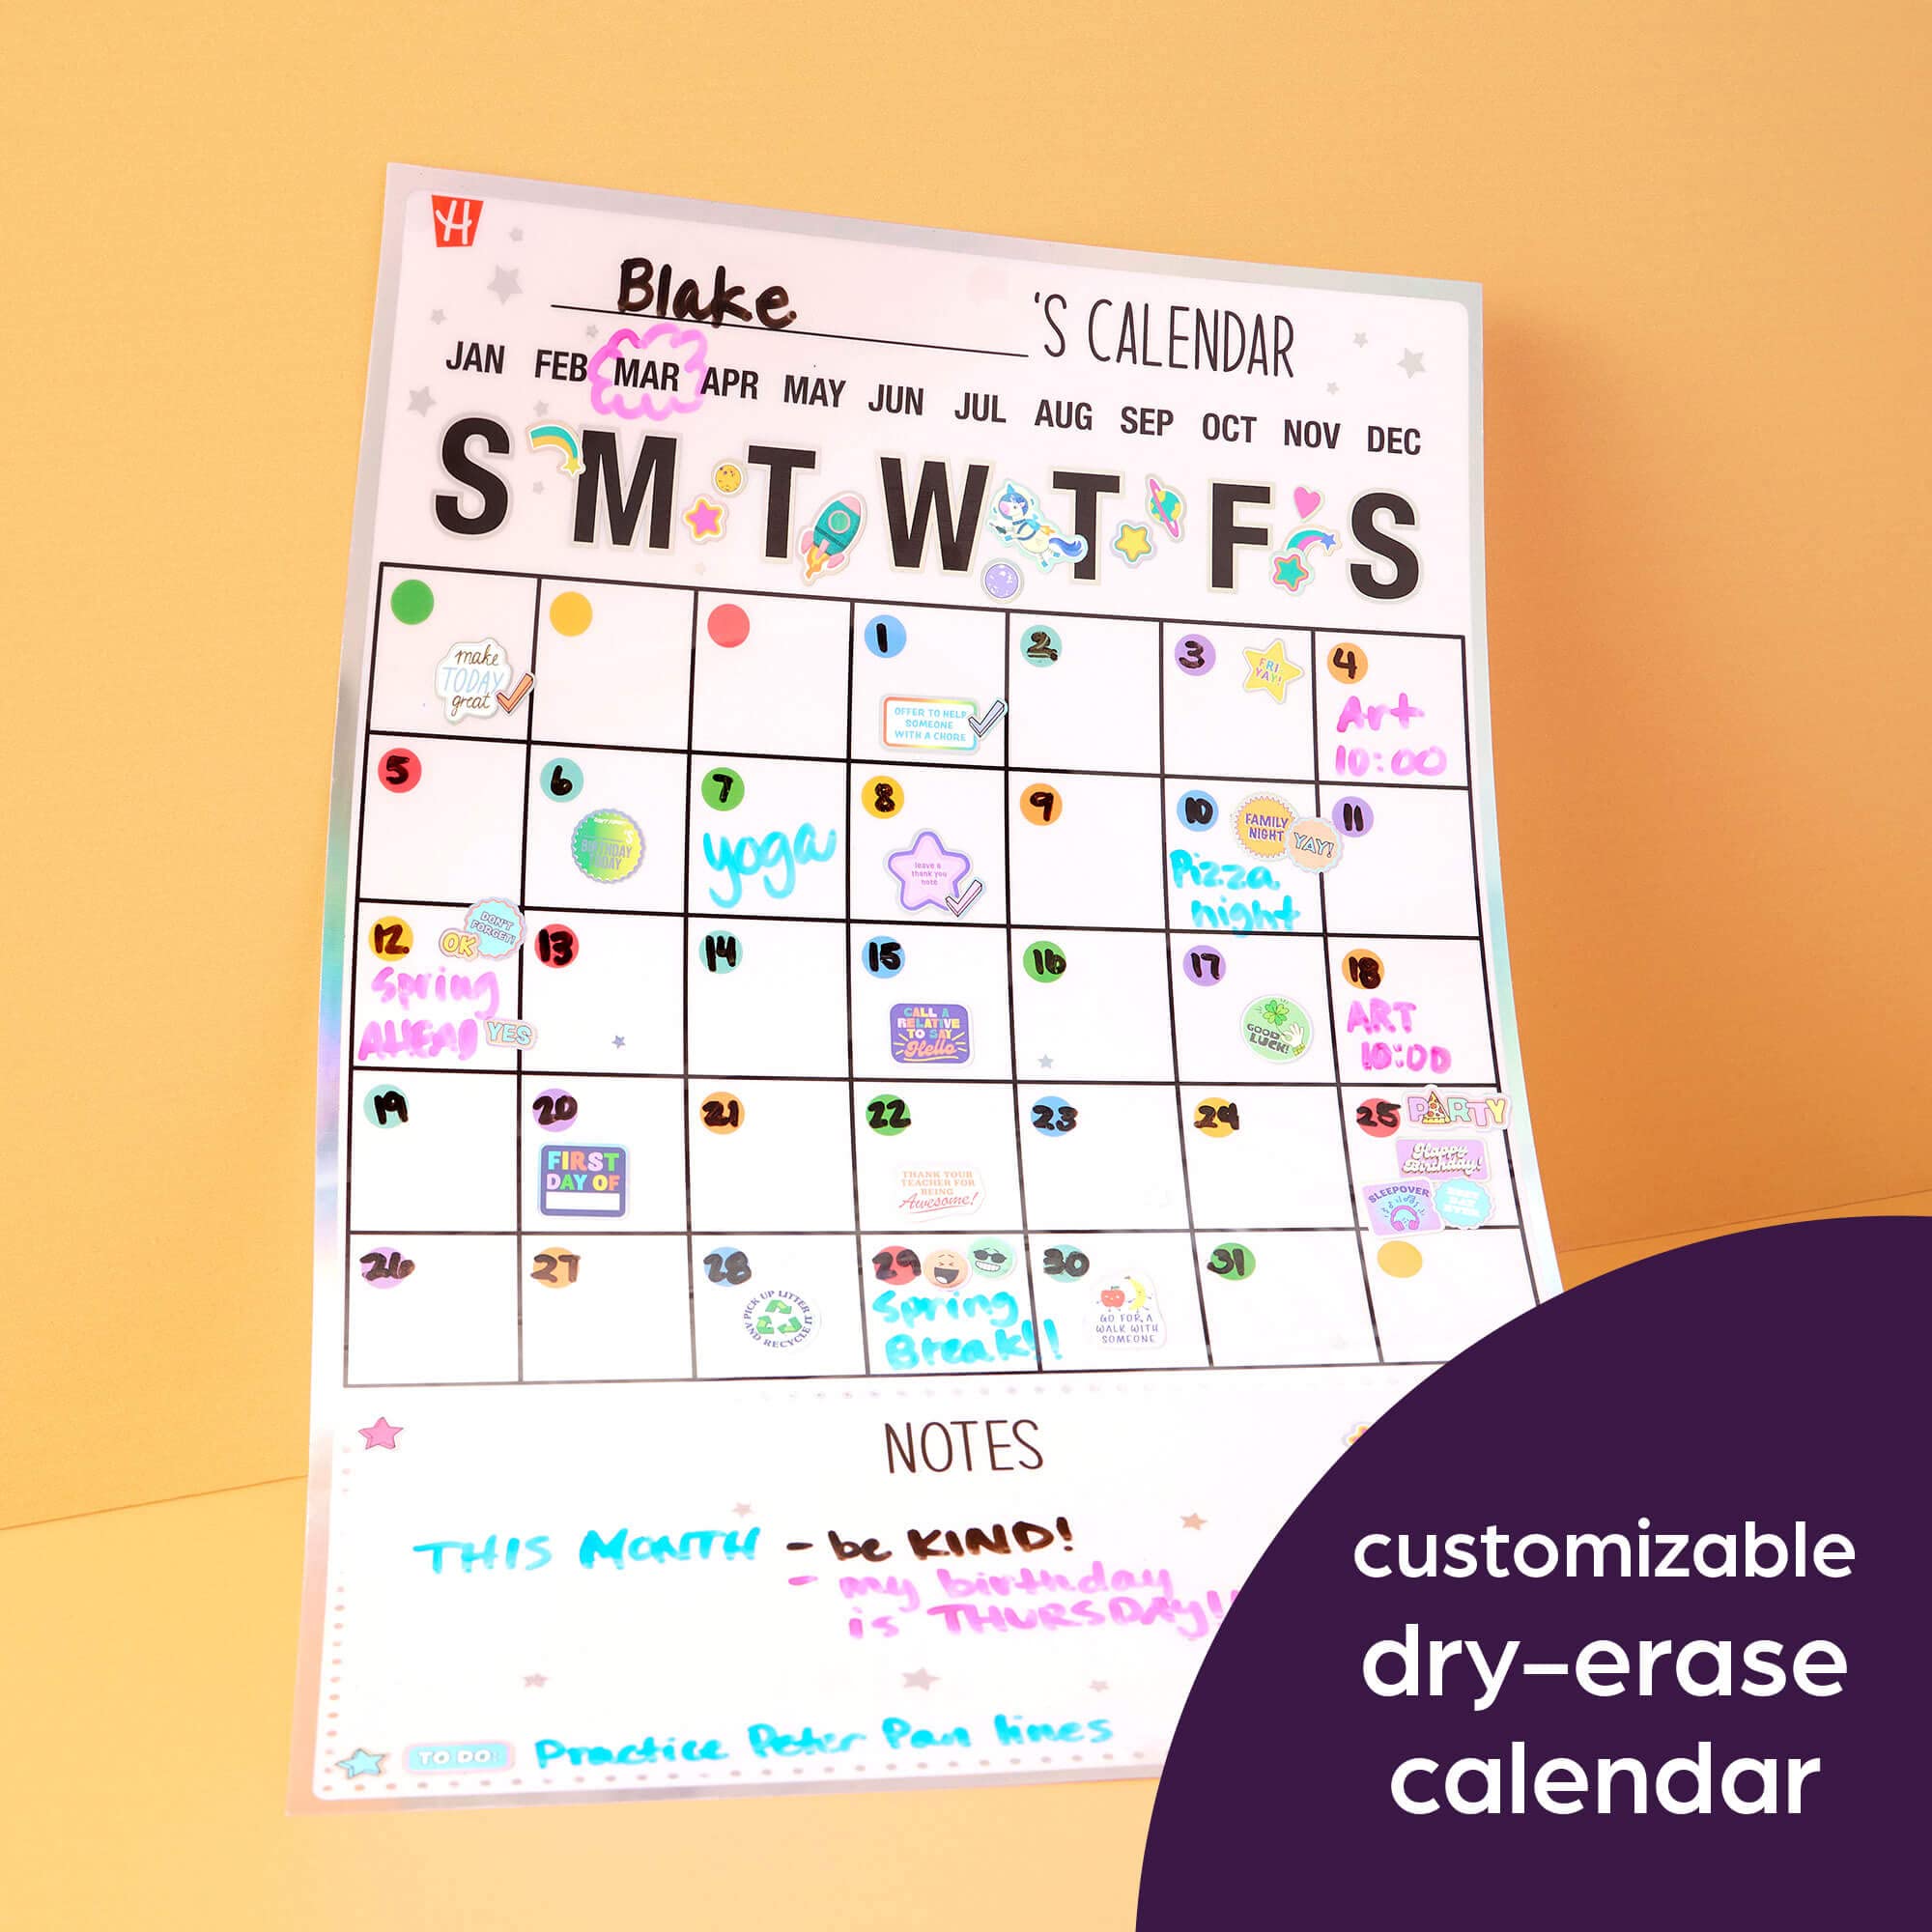 Highlights Kindness Dry-Erase Calendar for Kids, Includes 1300+ Reusable Stickers, Customizable Wall Calendar Promotes Self-Expression and Organization, Ages 6+